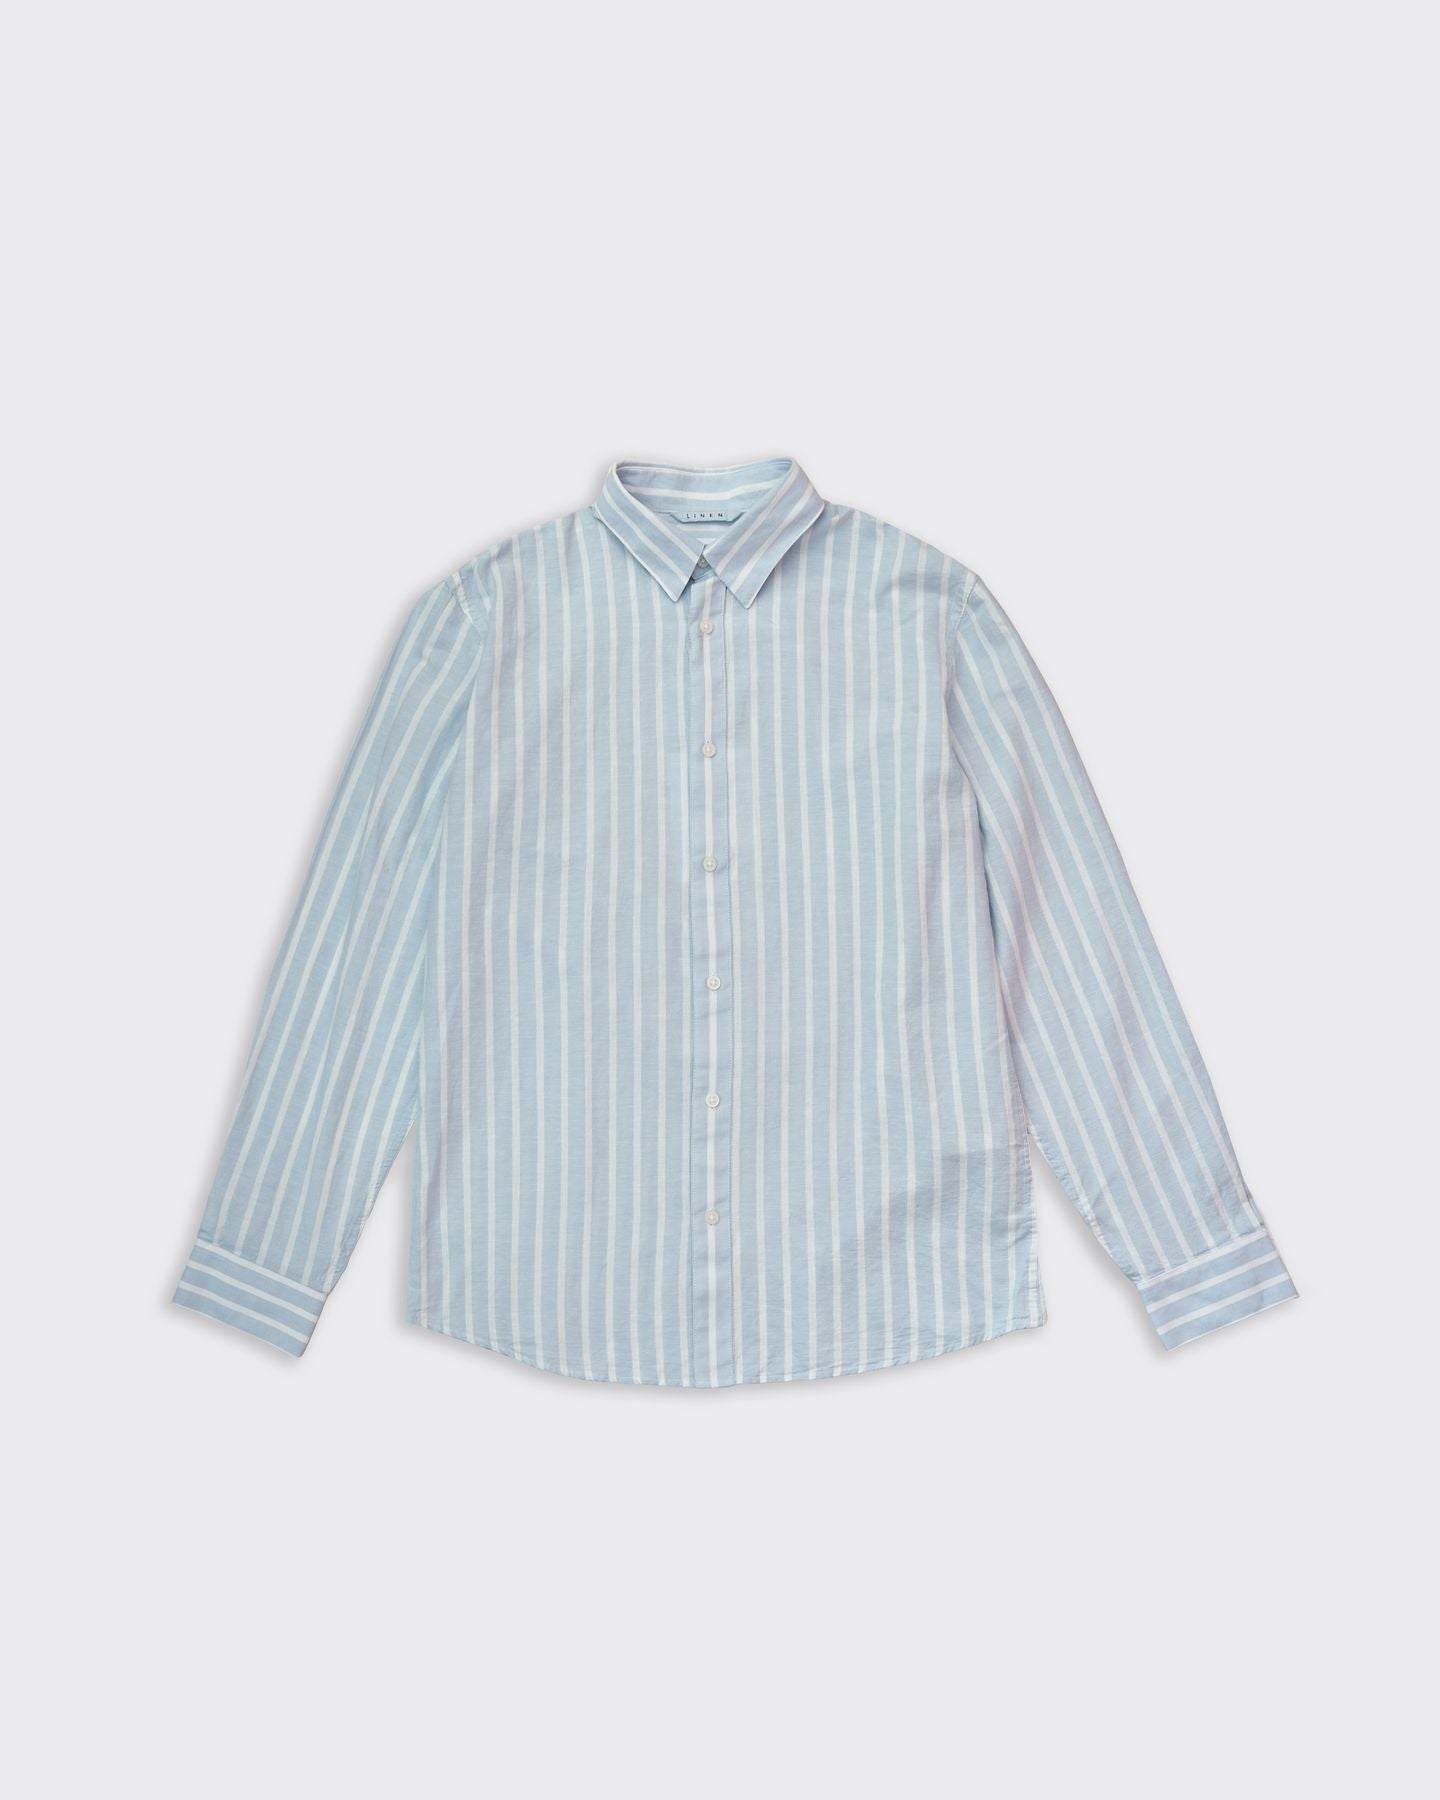 Image of Selected Homme Camicia Lino Stripes Azzurra